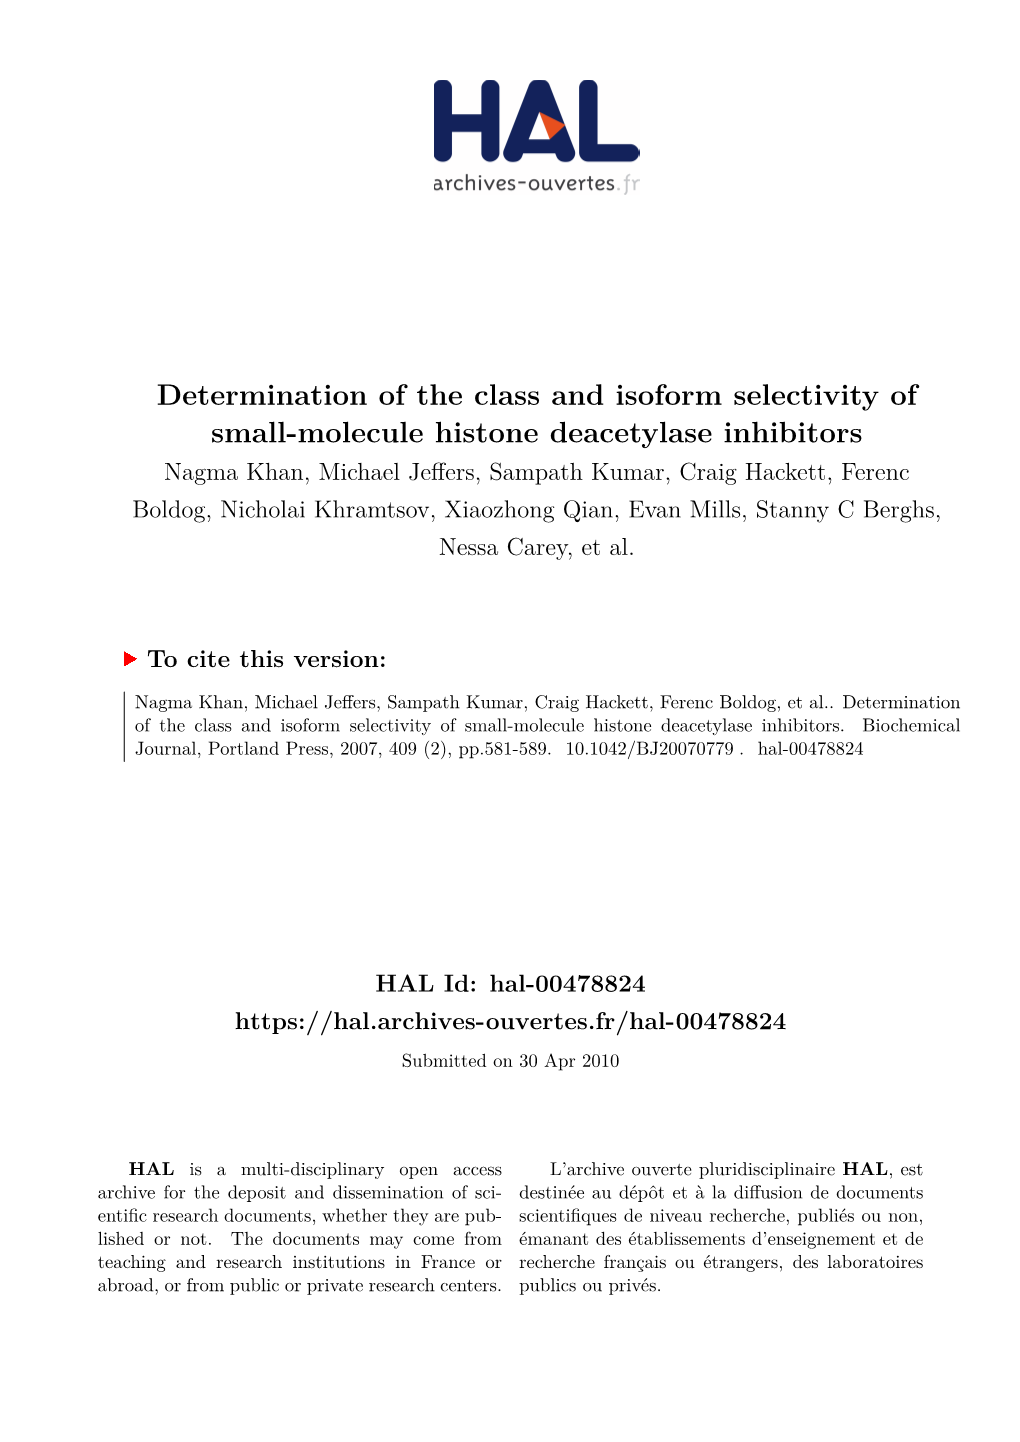 Determination of the Class and Isoform Selectivity of Small-Molecule